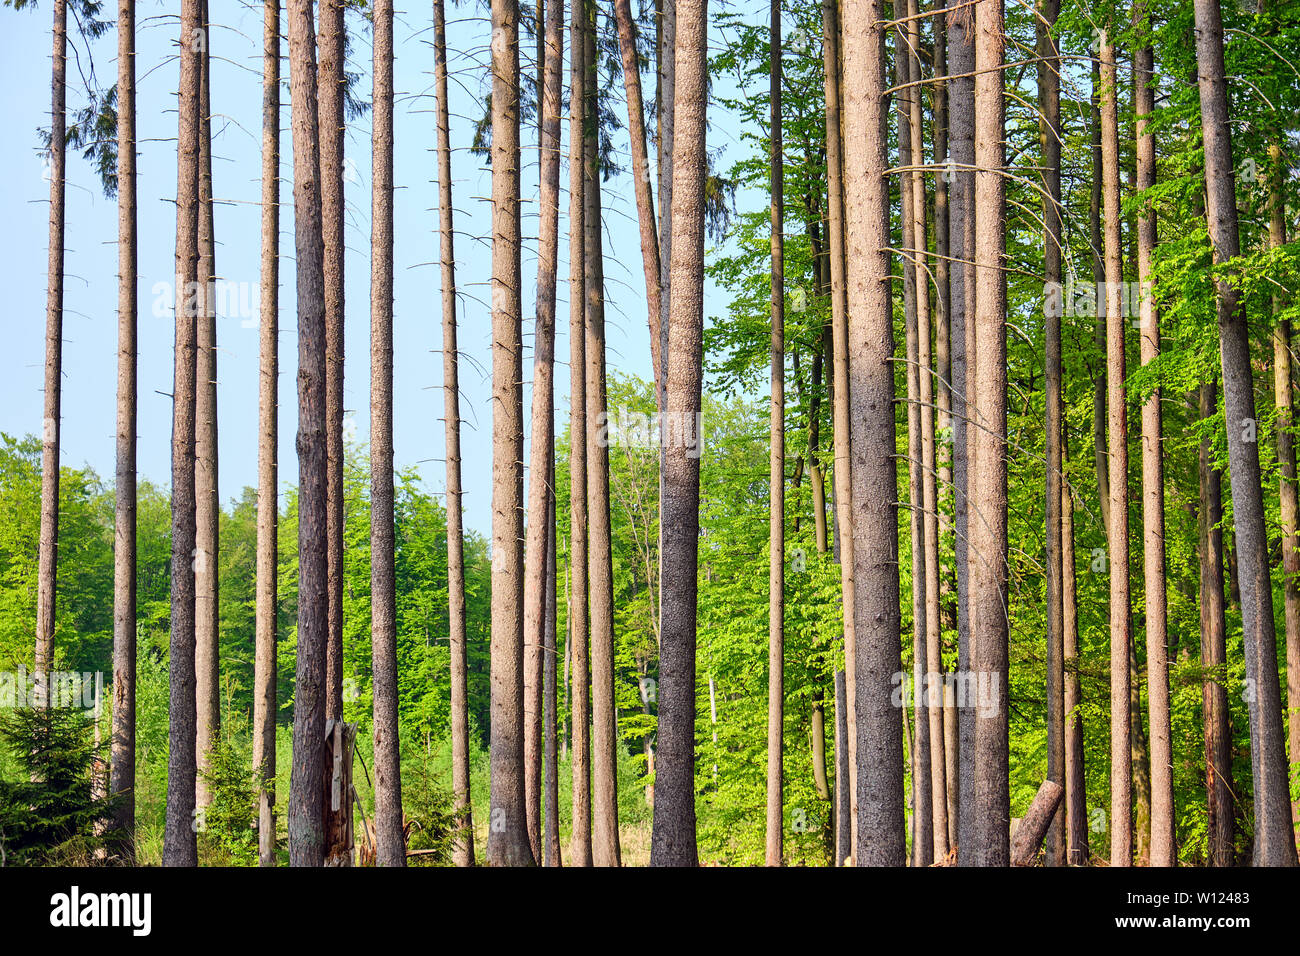 Detail of the trunks of spruce trees seen in a german forest Stock Photo